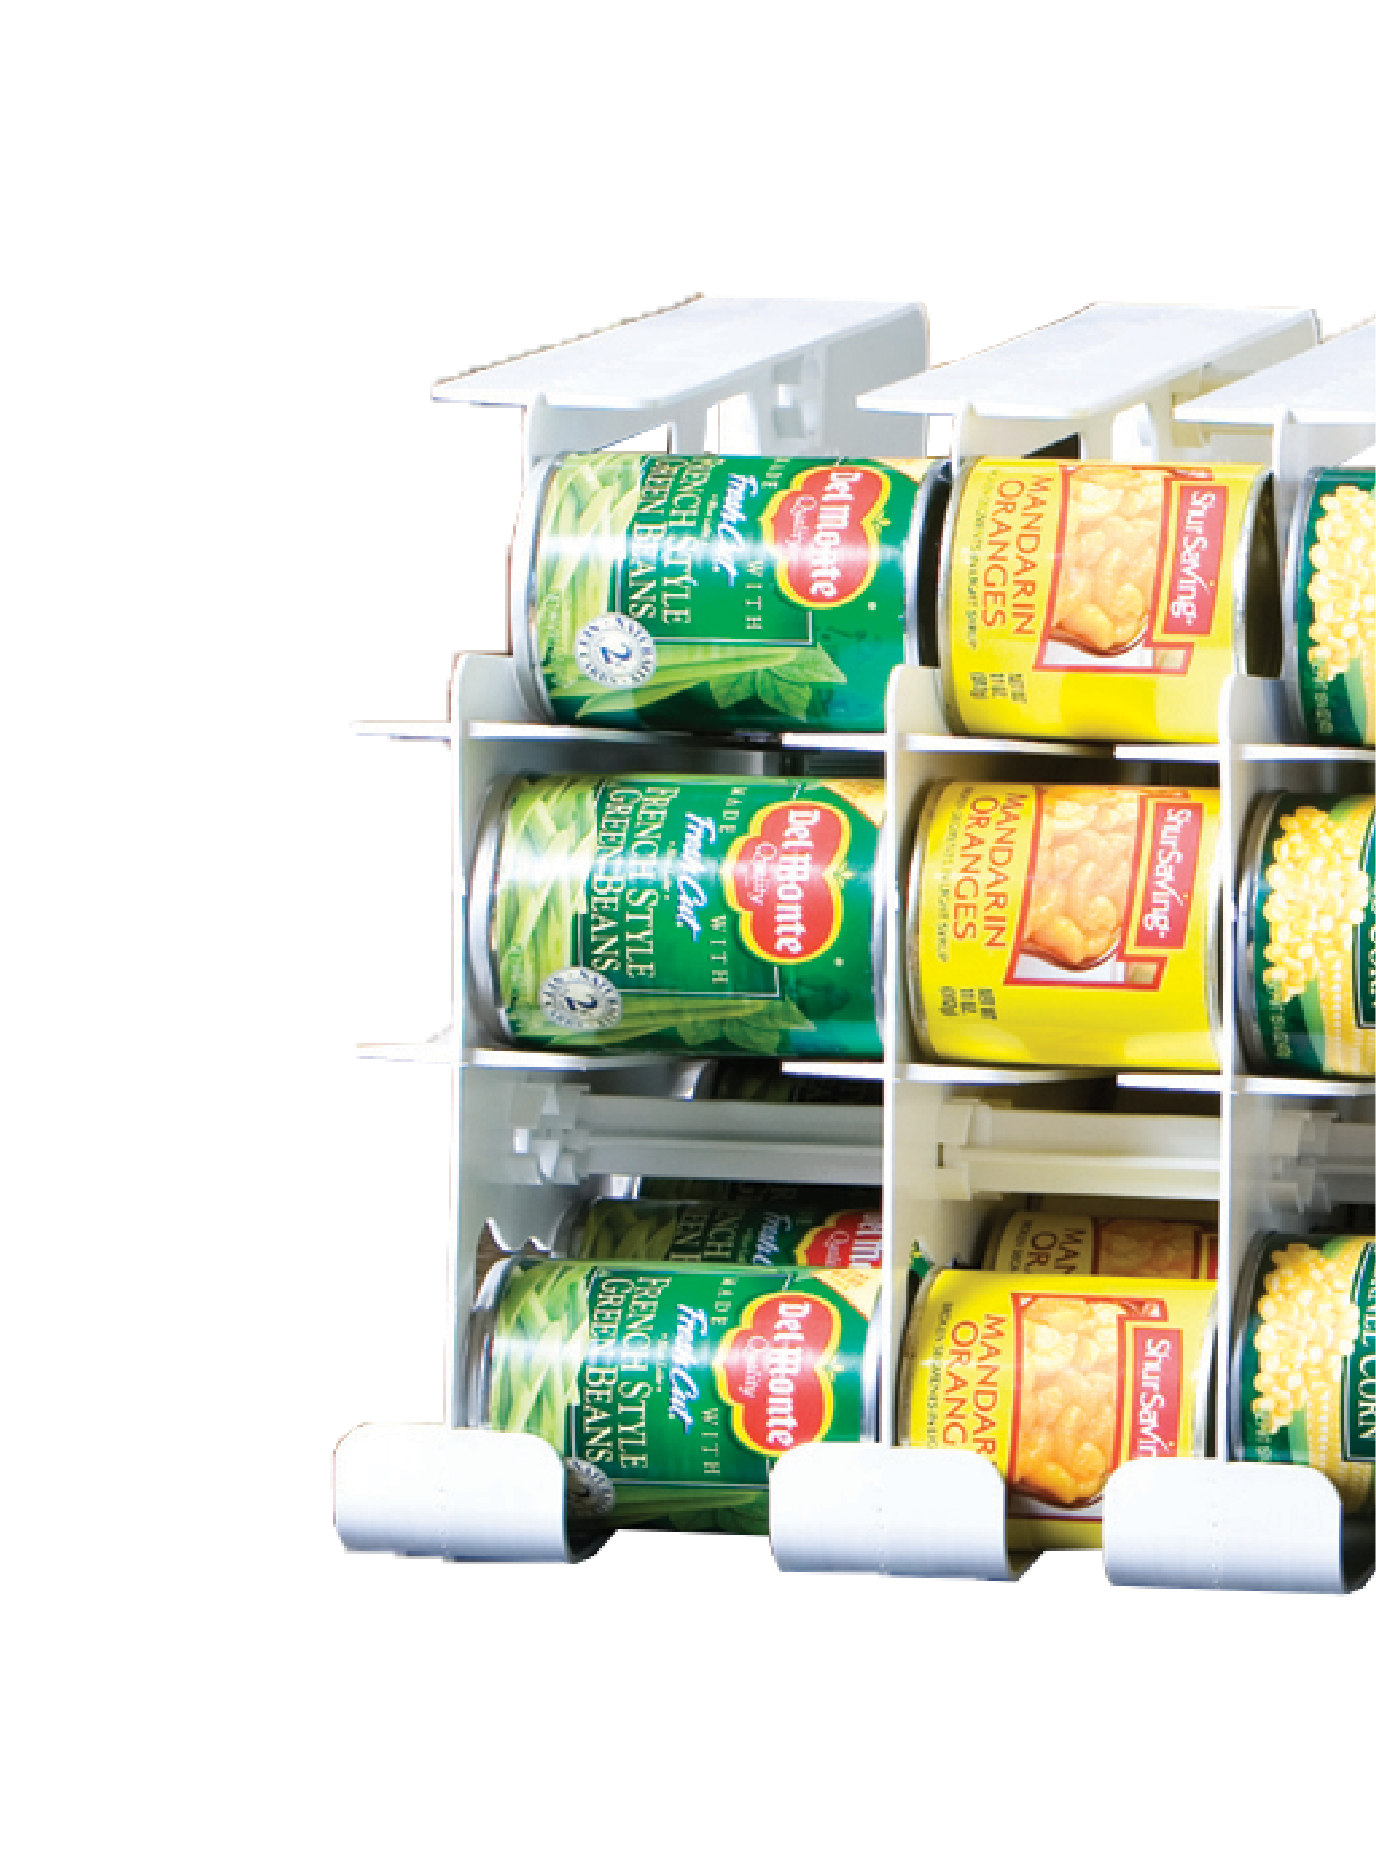 Shelf Reliance Compact Cansolidator Pantry Food W/rotation System